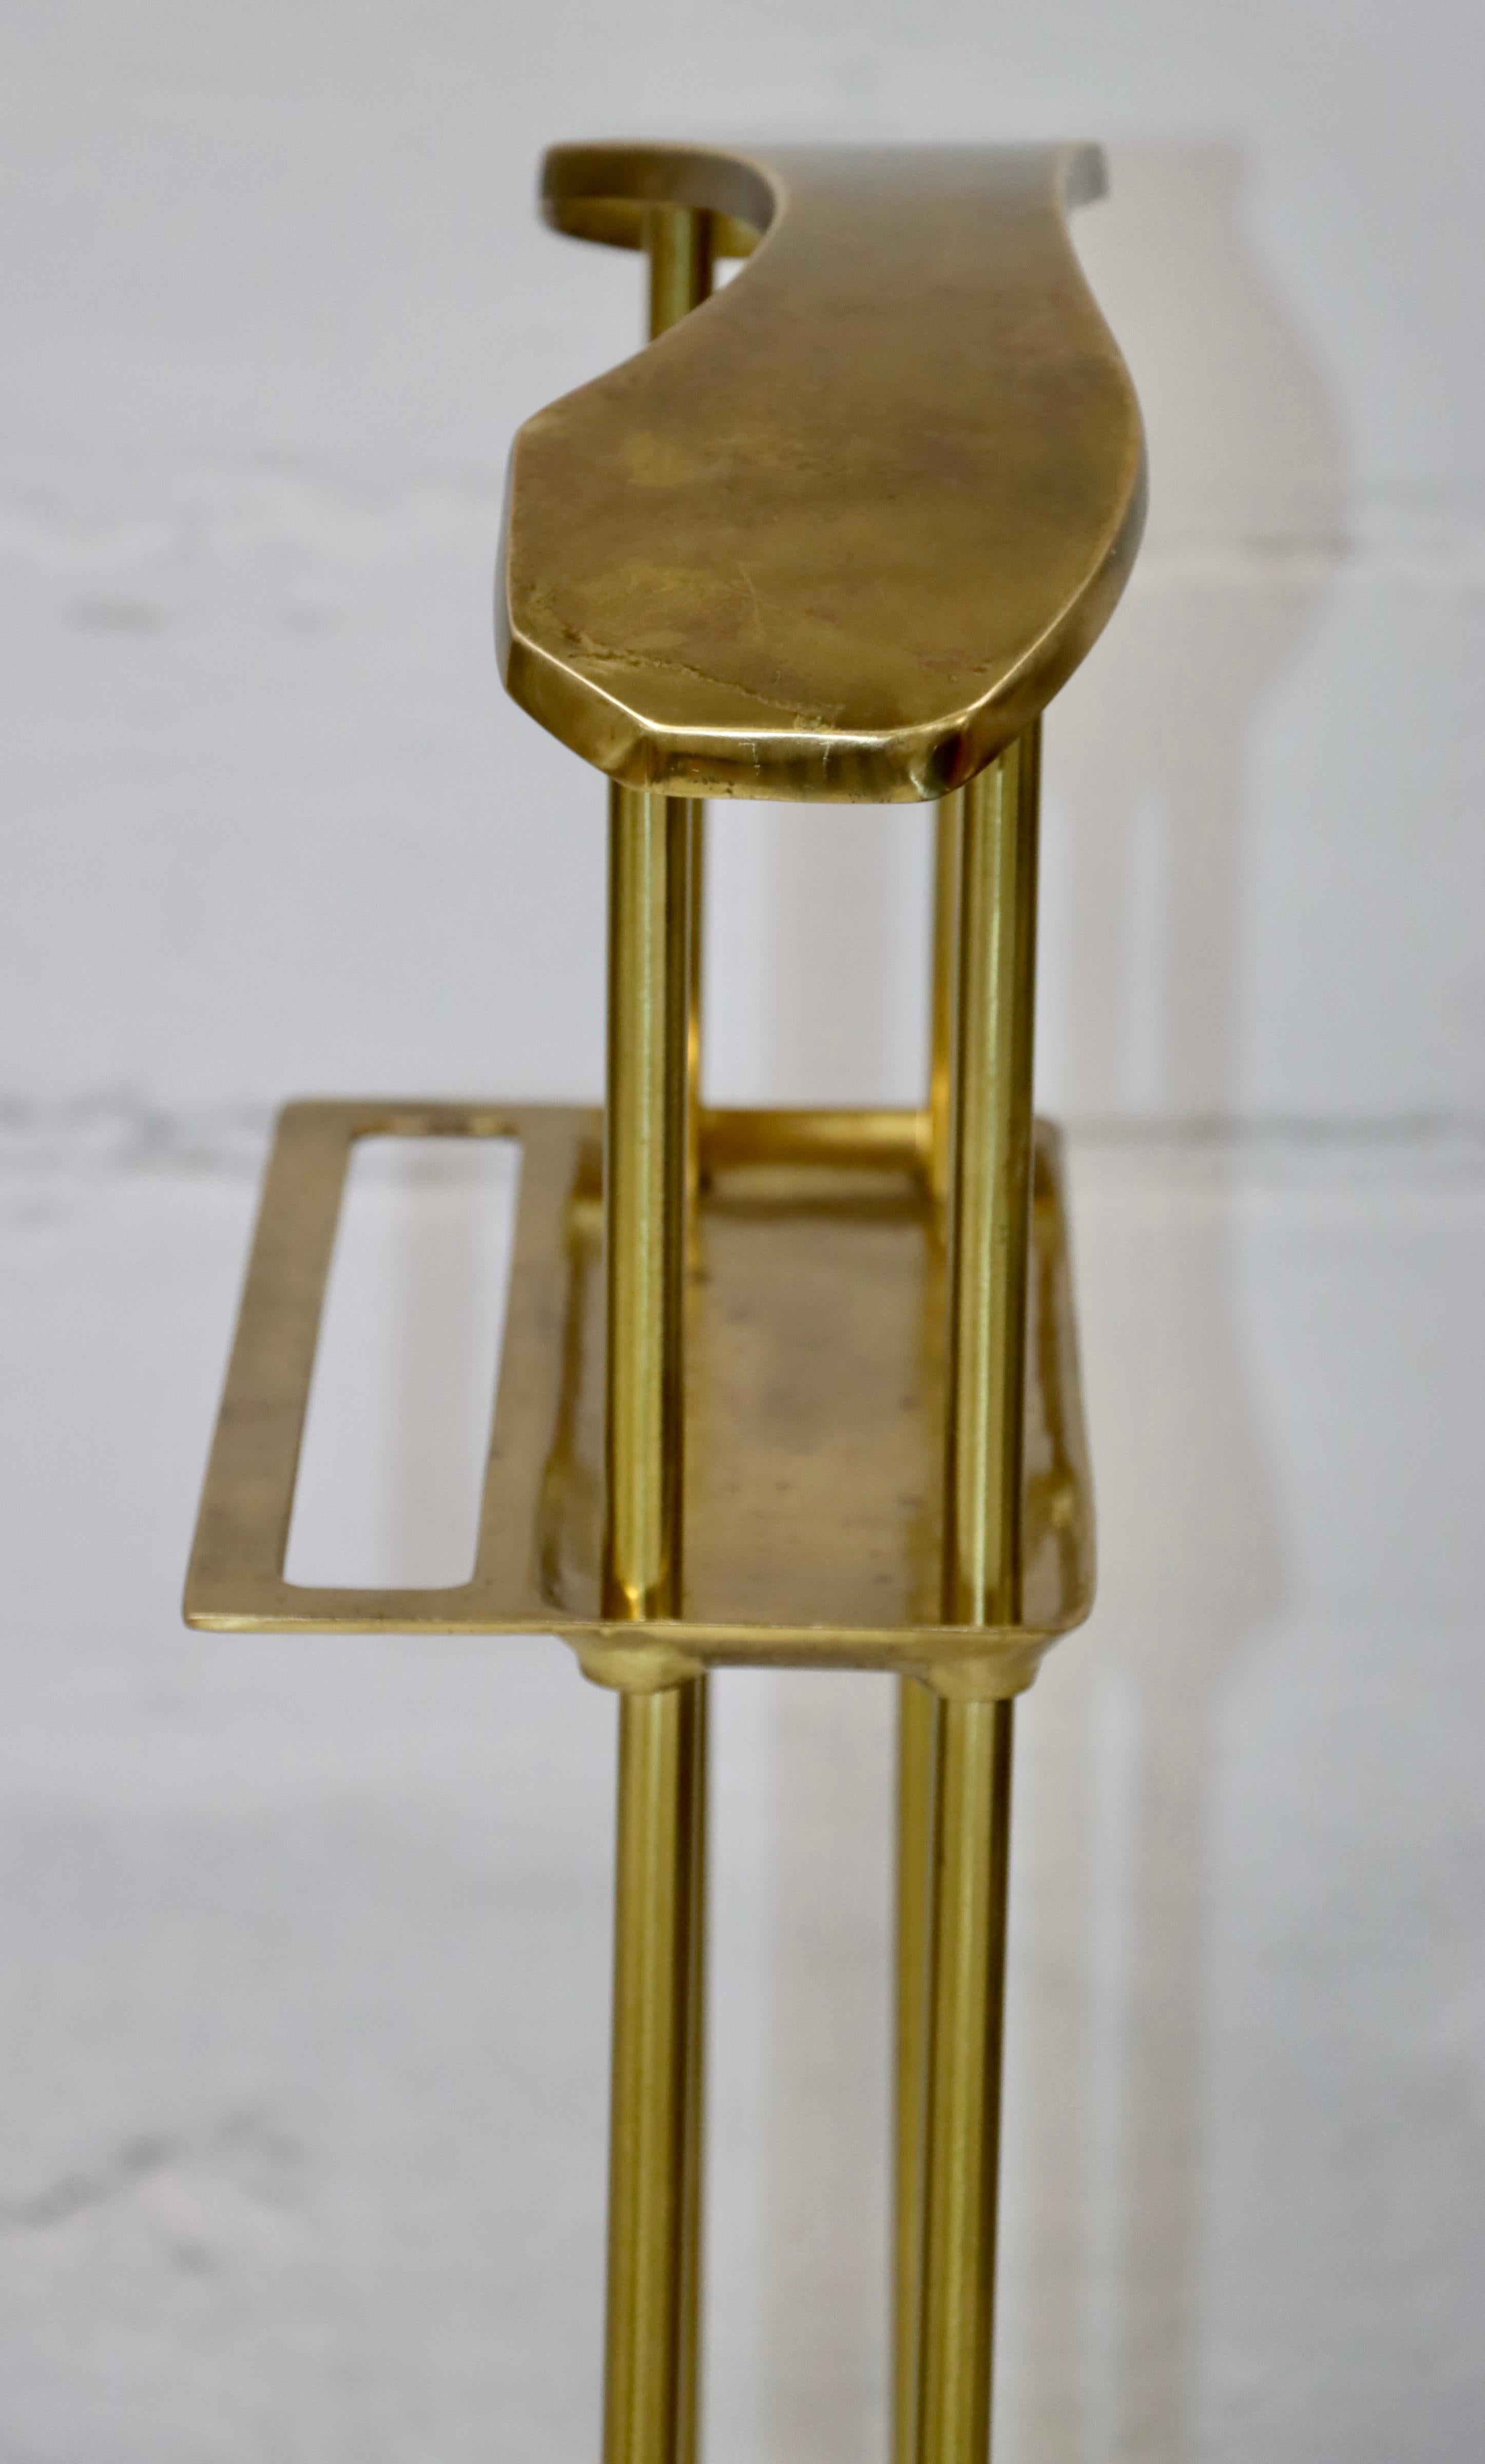 Late 20th Century 1980's Modernist Brass Valet Stand By Decorative Crafts Inc. For Sale